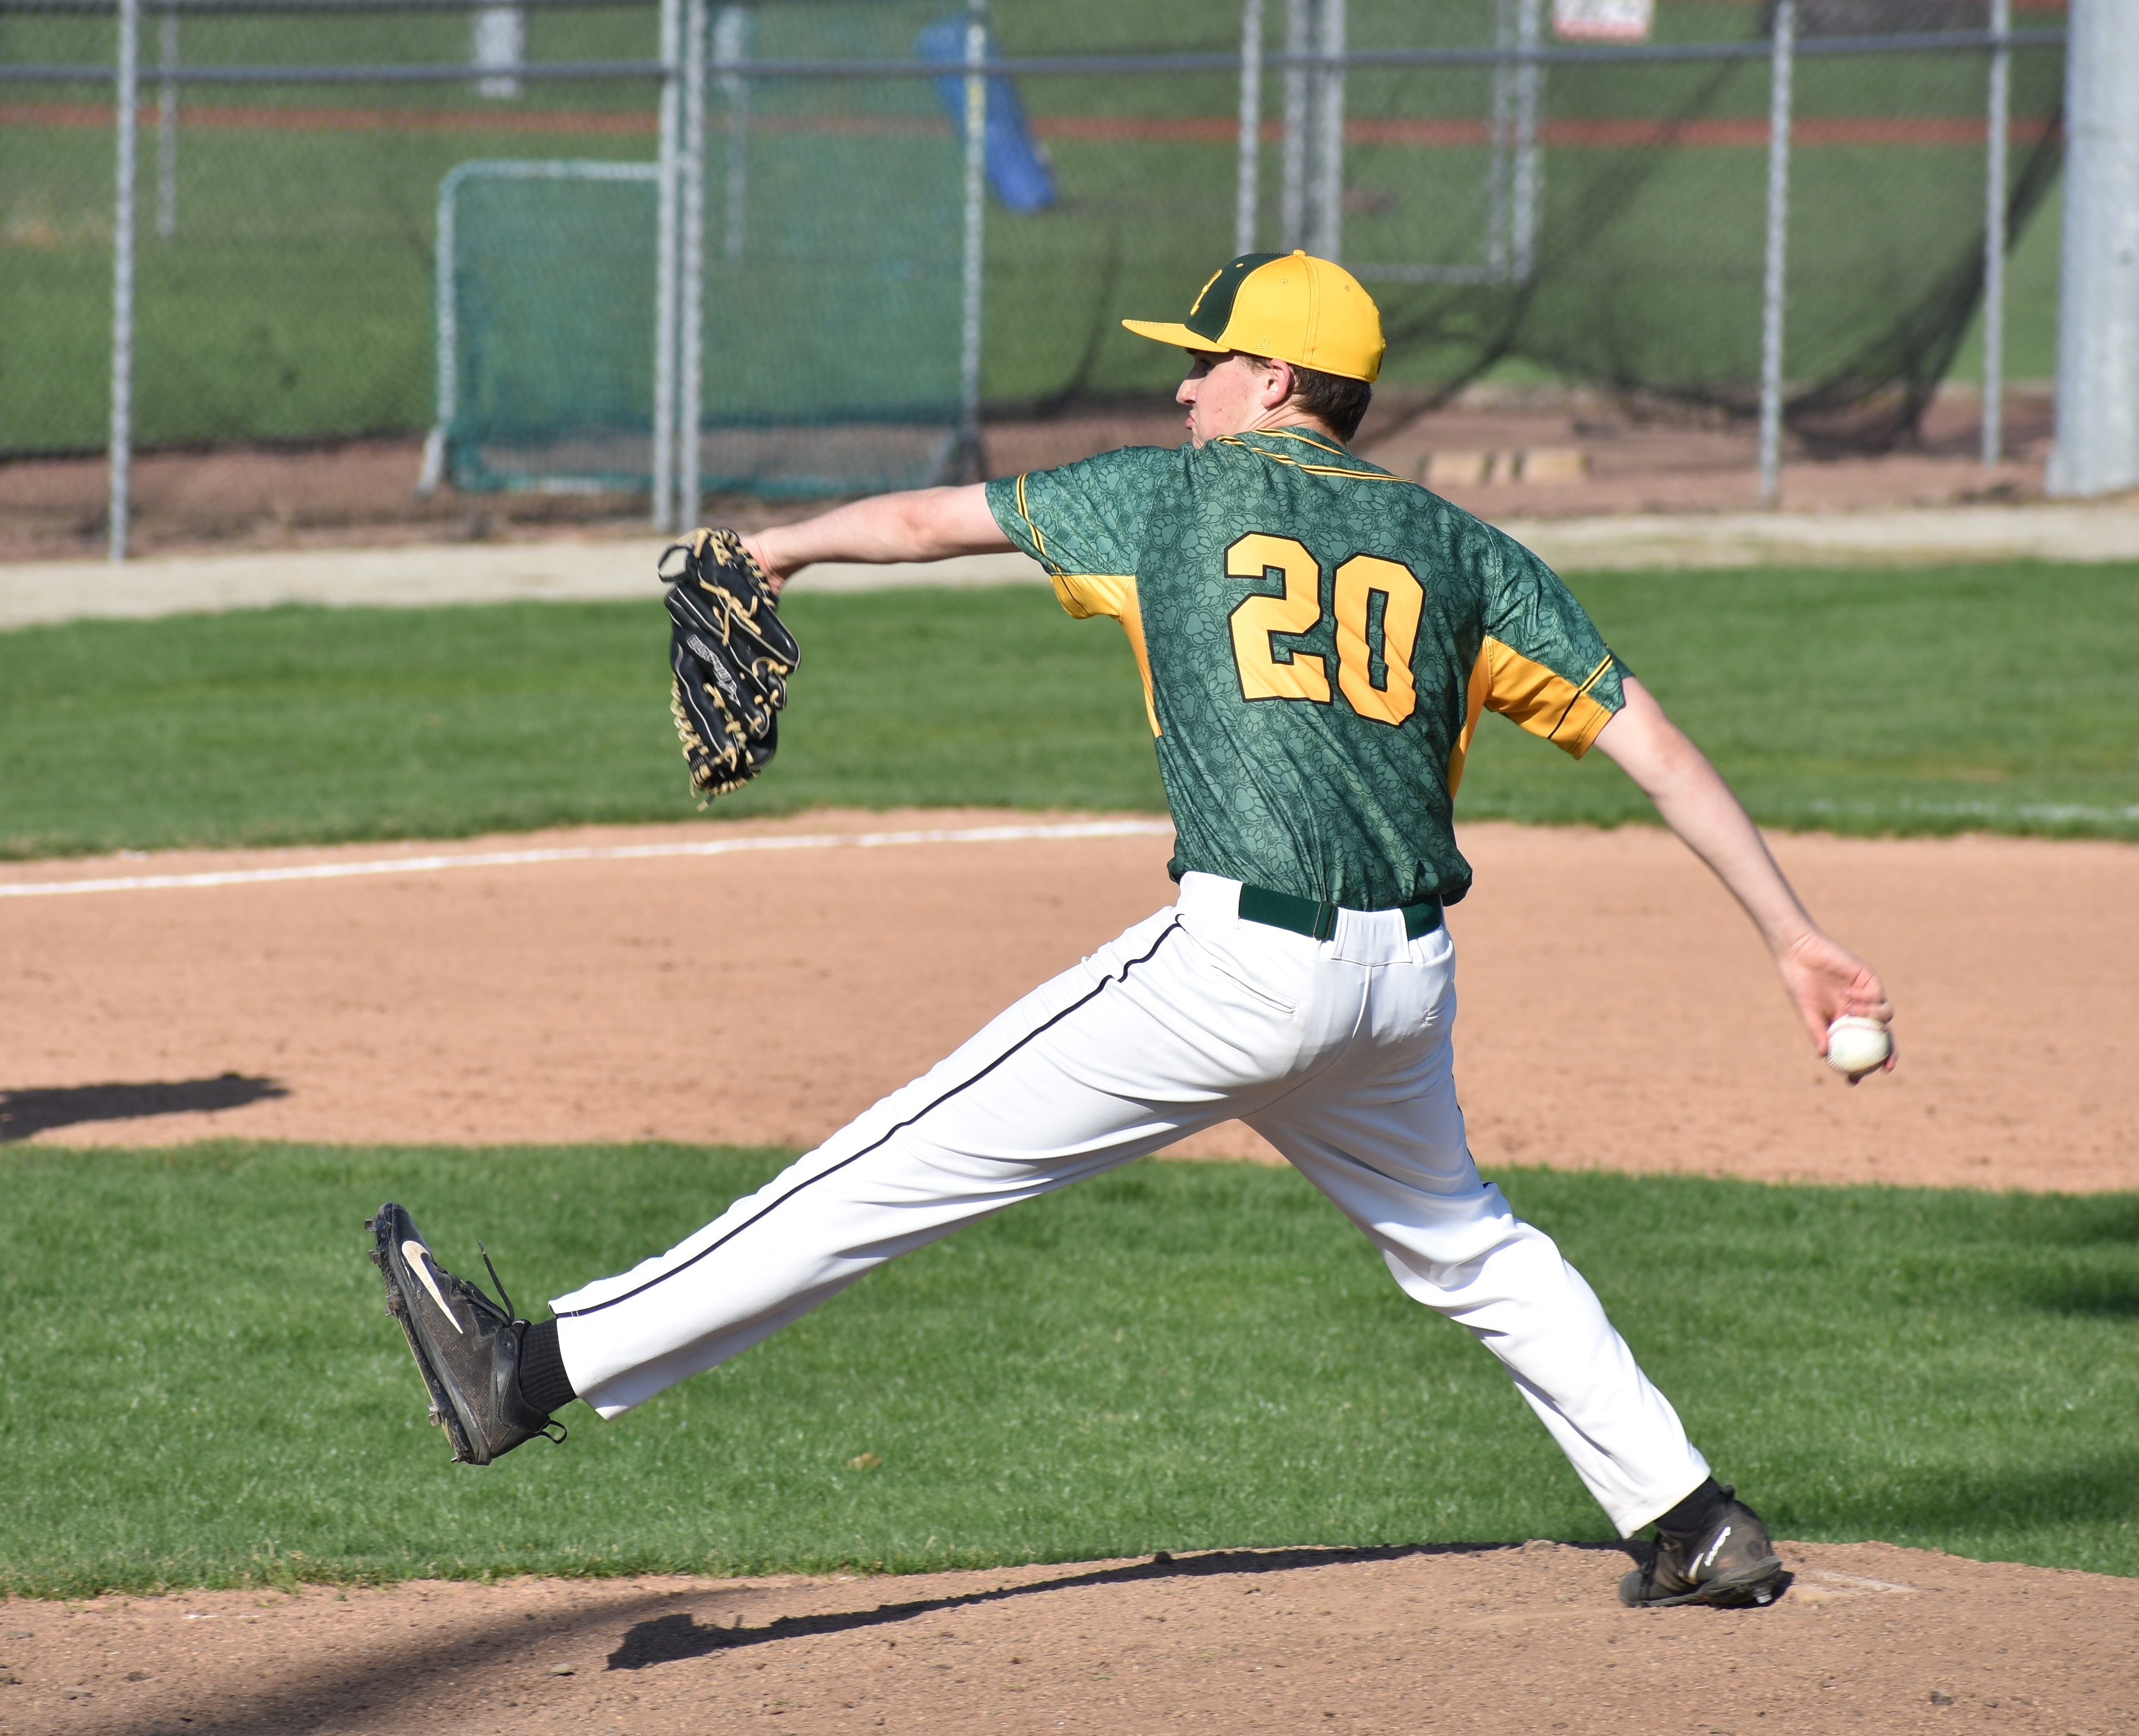 Jaguars lose to Trojans in extra innings